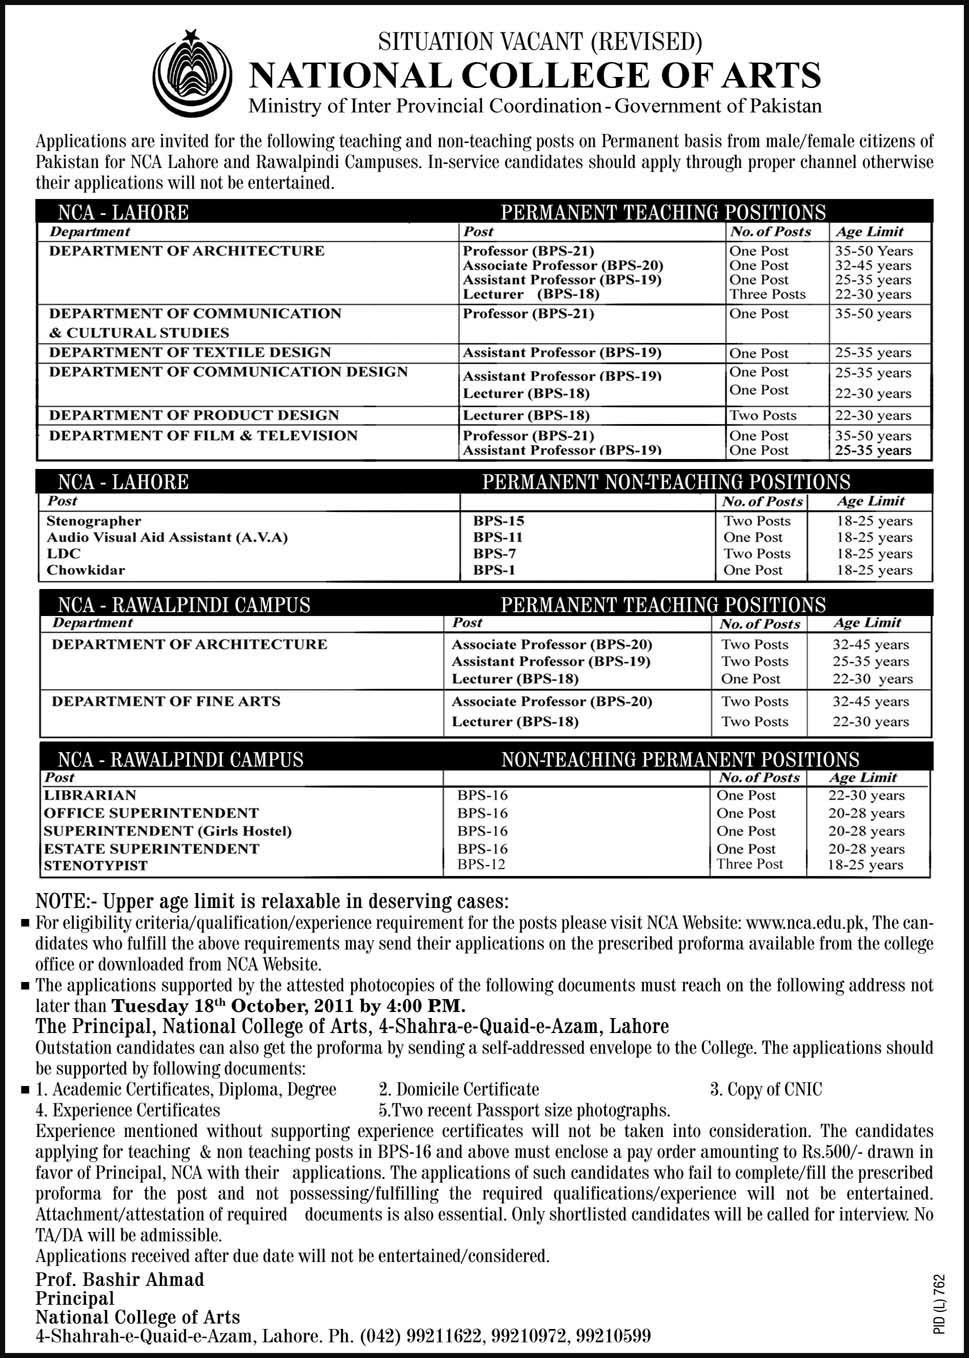 National College of Arts Required Faculty and Admin Staff